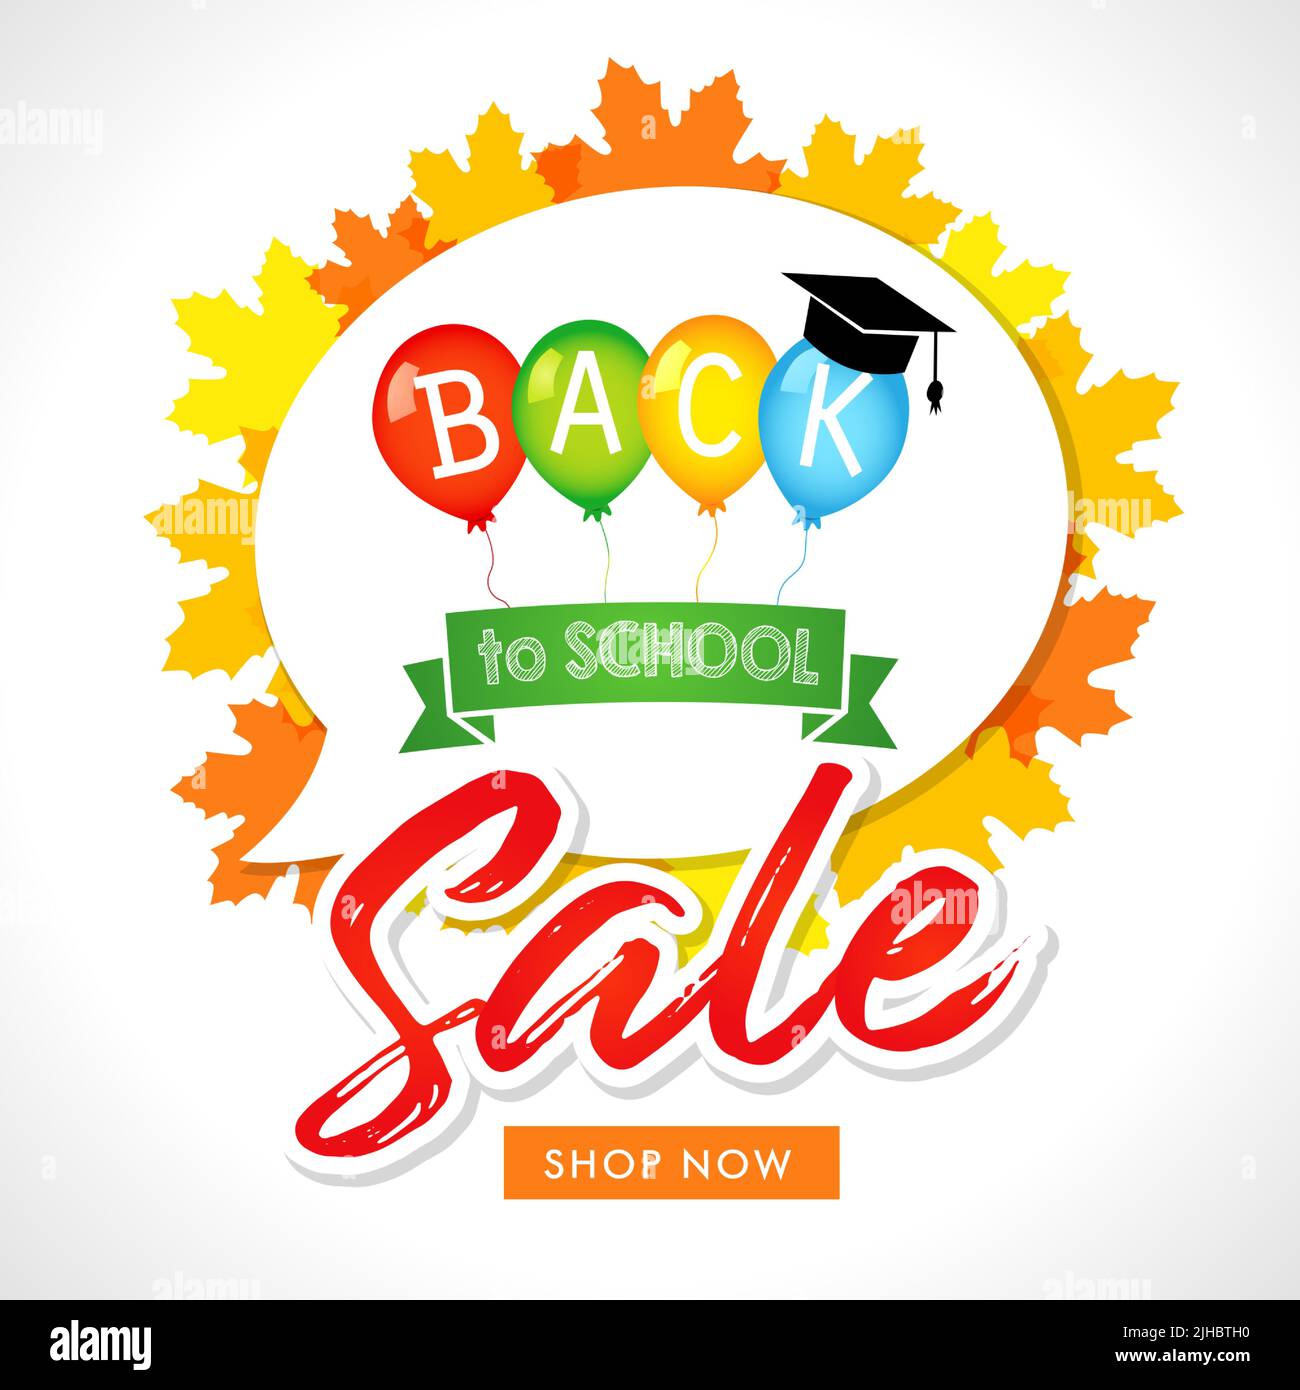 Back to School Sale icon or banner concept. Maple leaves, academic cap and 3D balloons. School background with dialogue cloud. Isolated abstract graph Stock Vector